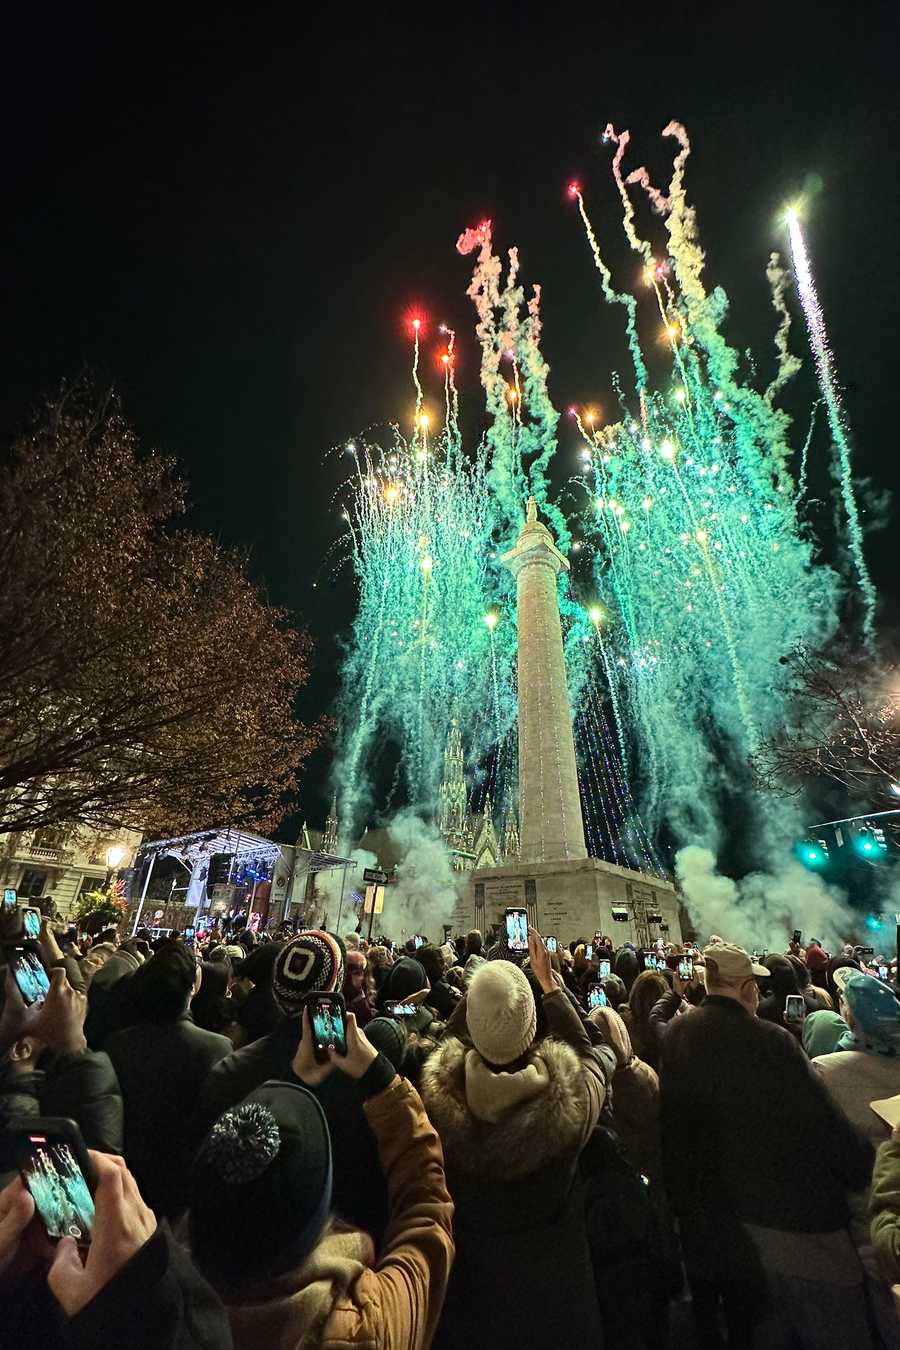 See the 2022 Washington Monument lighting in Baltimore